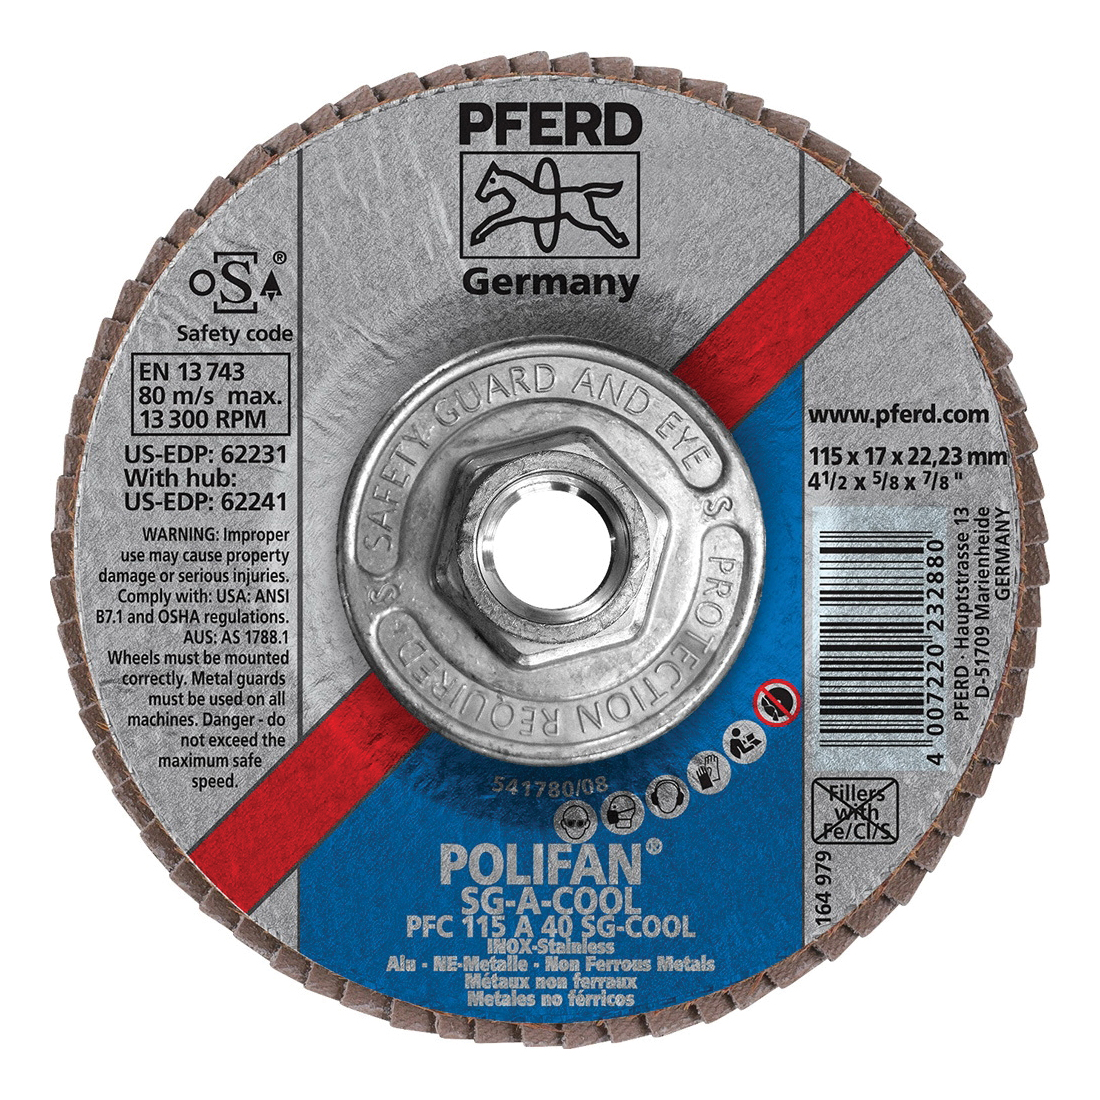 PFERD Polifan® 62241 Performance Line SG A-COOL Threaded Coated Abrasive Flap Disc, 4-1/2 in Dia, 40 Grit, Aluminum Oxide Abrasive, Type 29 Conical Disc